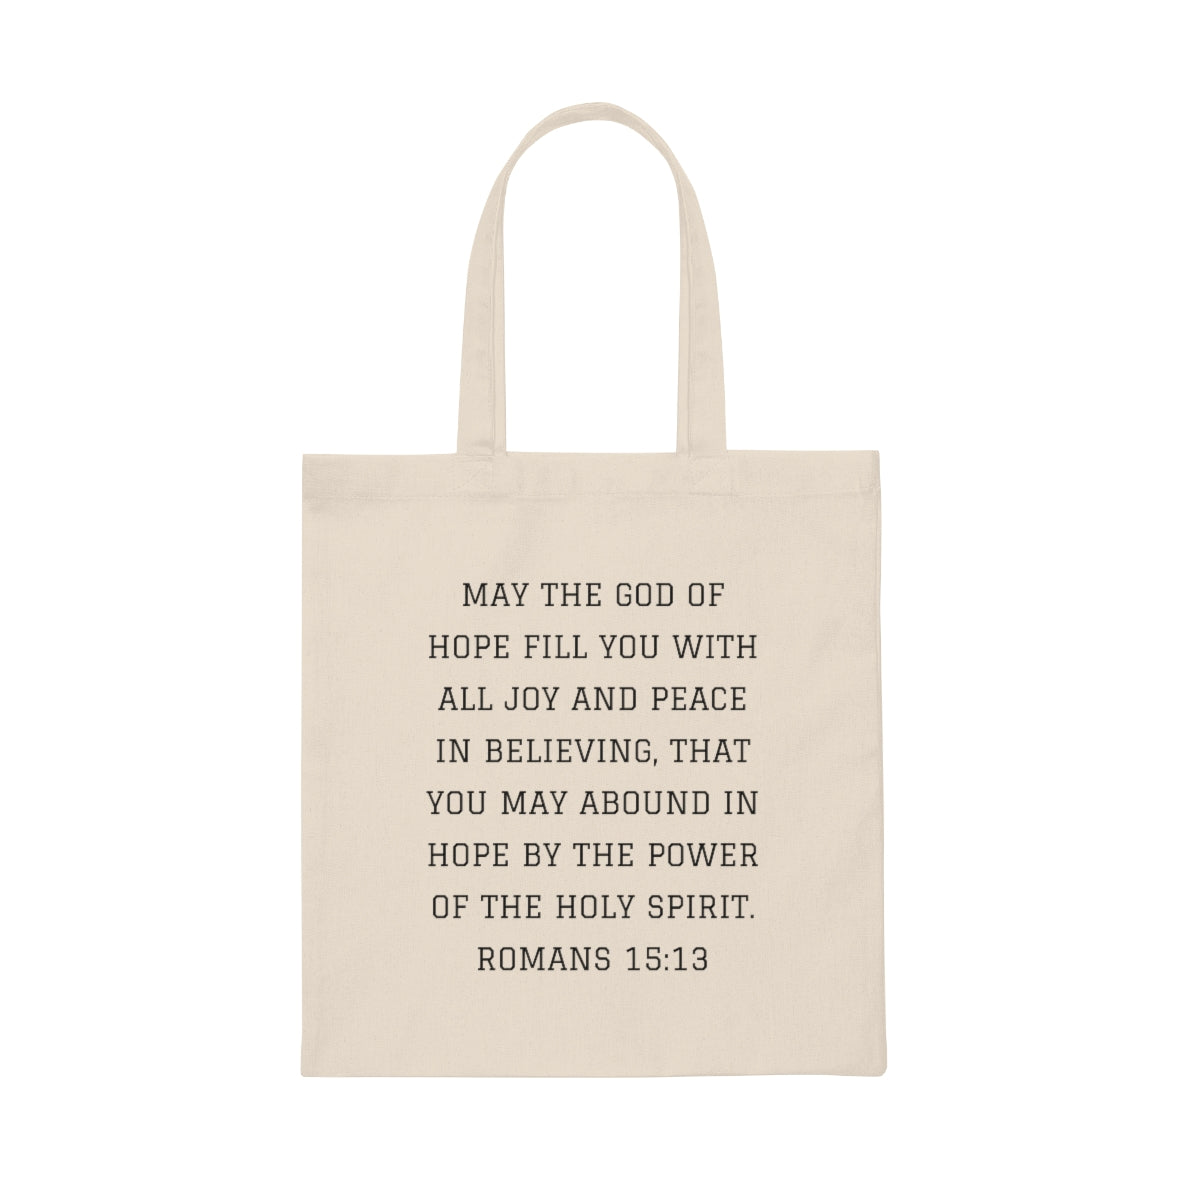 Abounding in Hope Tote